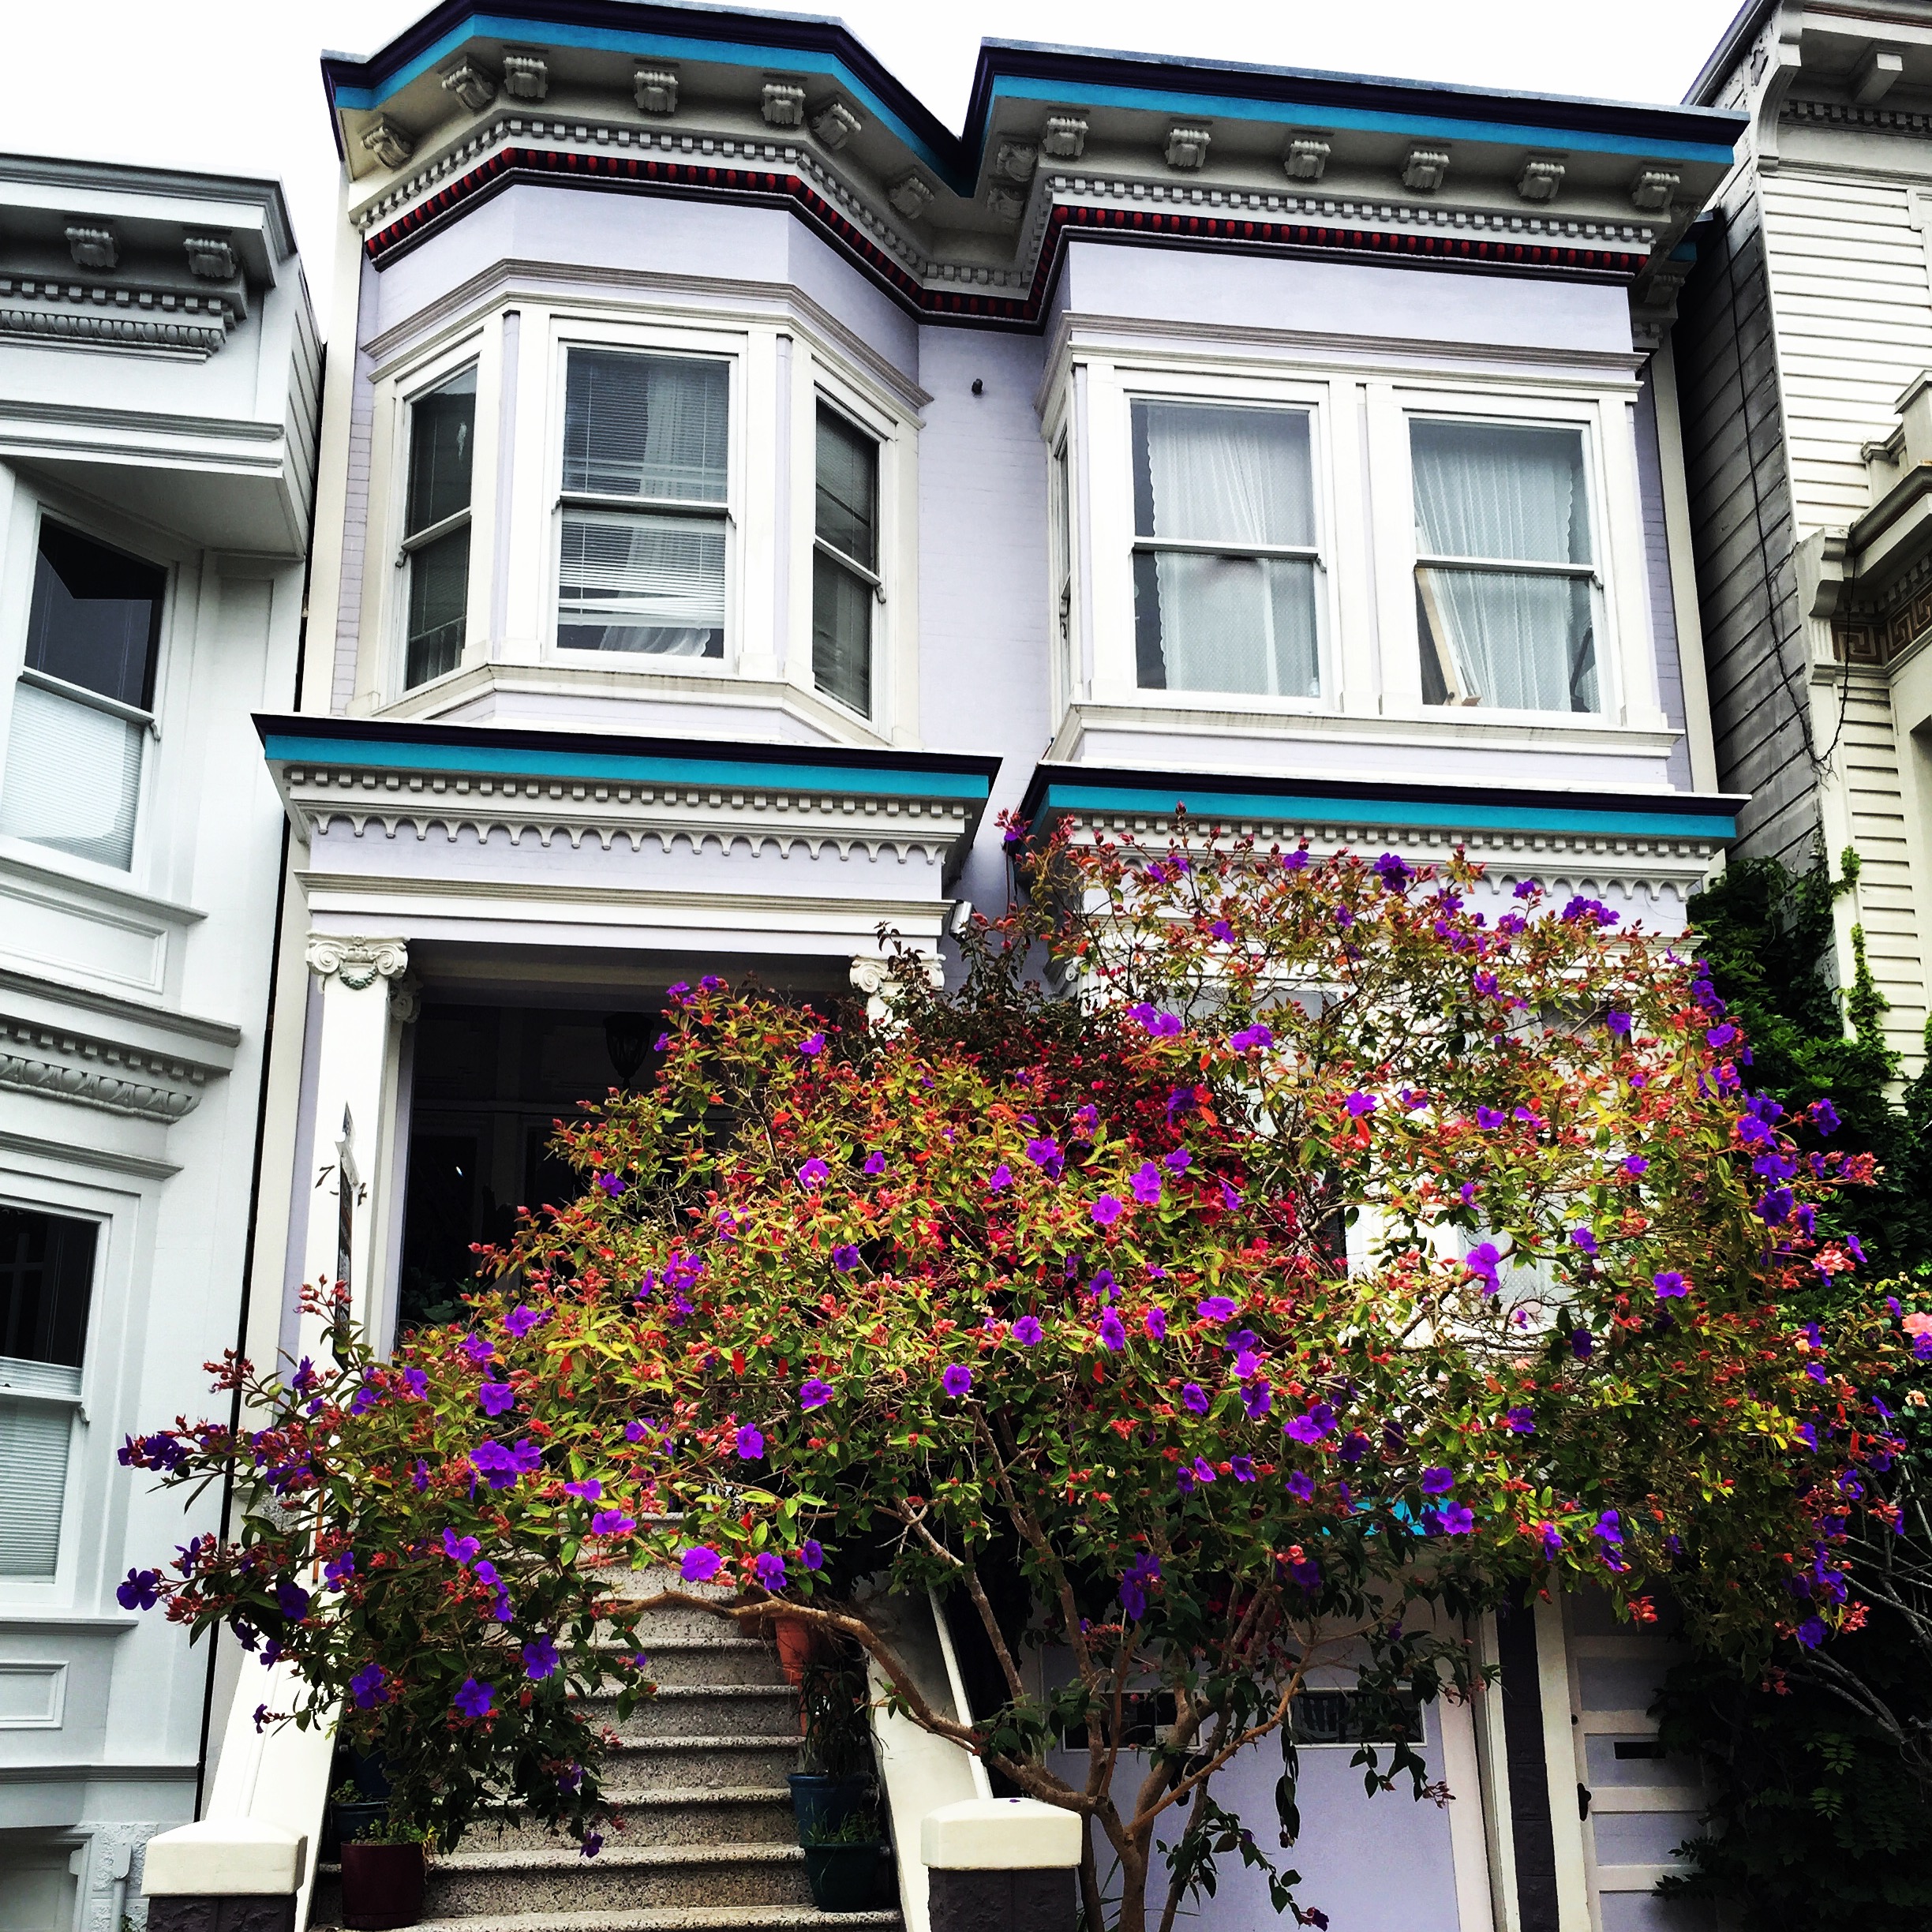 SOLD | Victorian Single Family in Cole Valley / Haight Ashbury | $2,250,000 Off Market